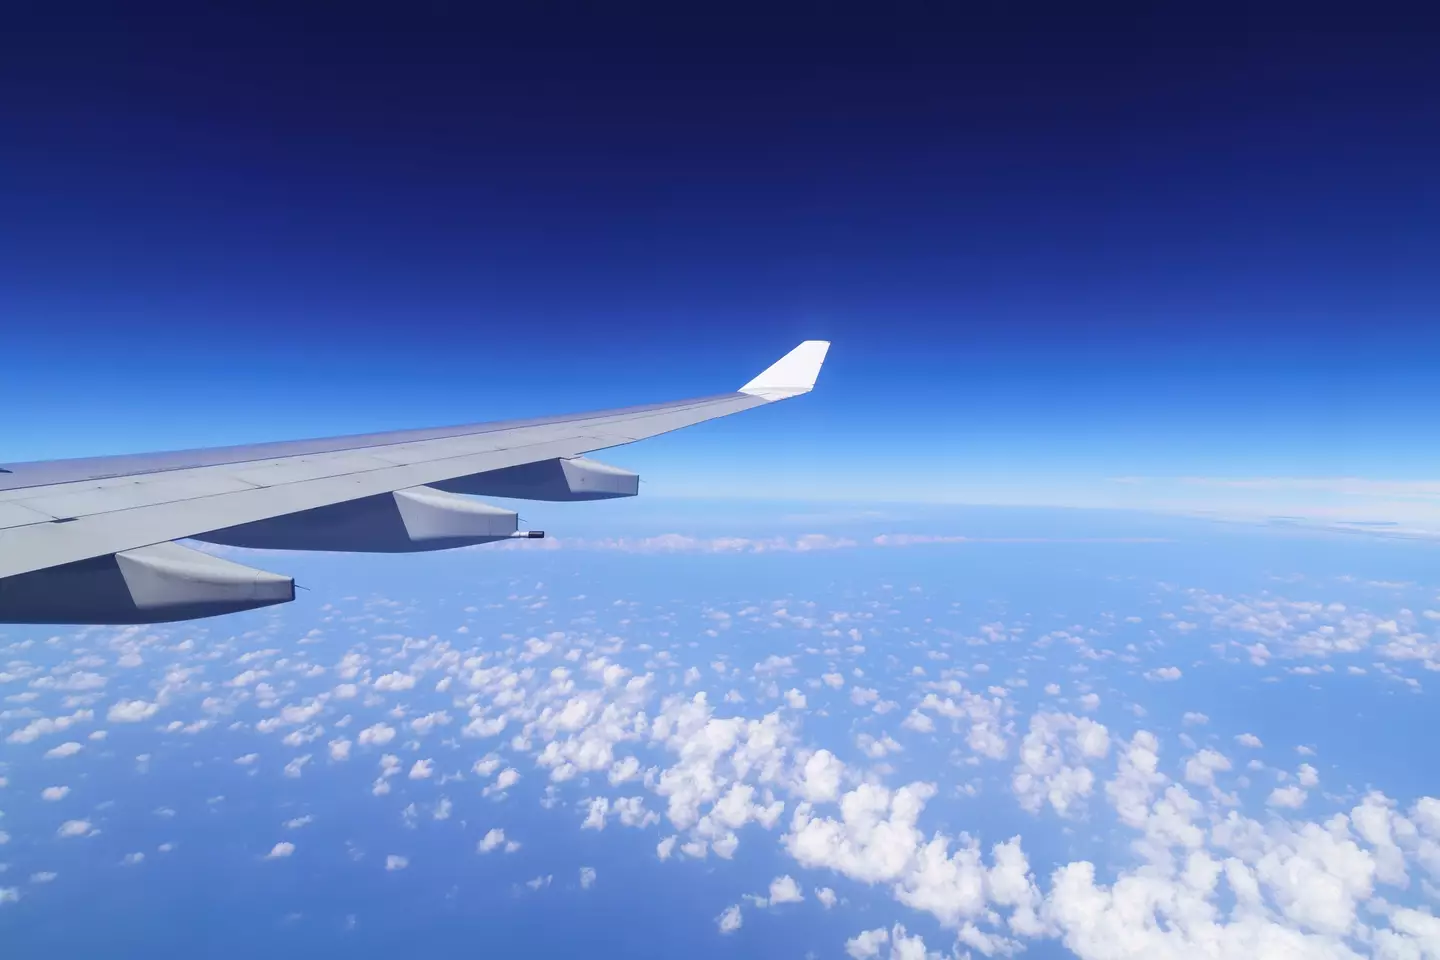 The debate around flying against the rotation of the Earth not speeding up flights was sparked online (Getty Stock Photos)